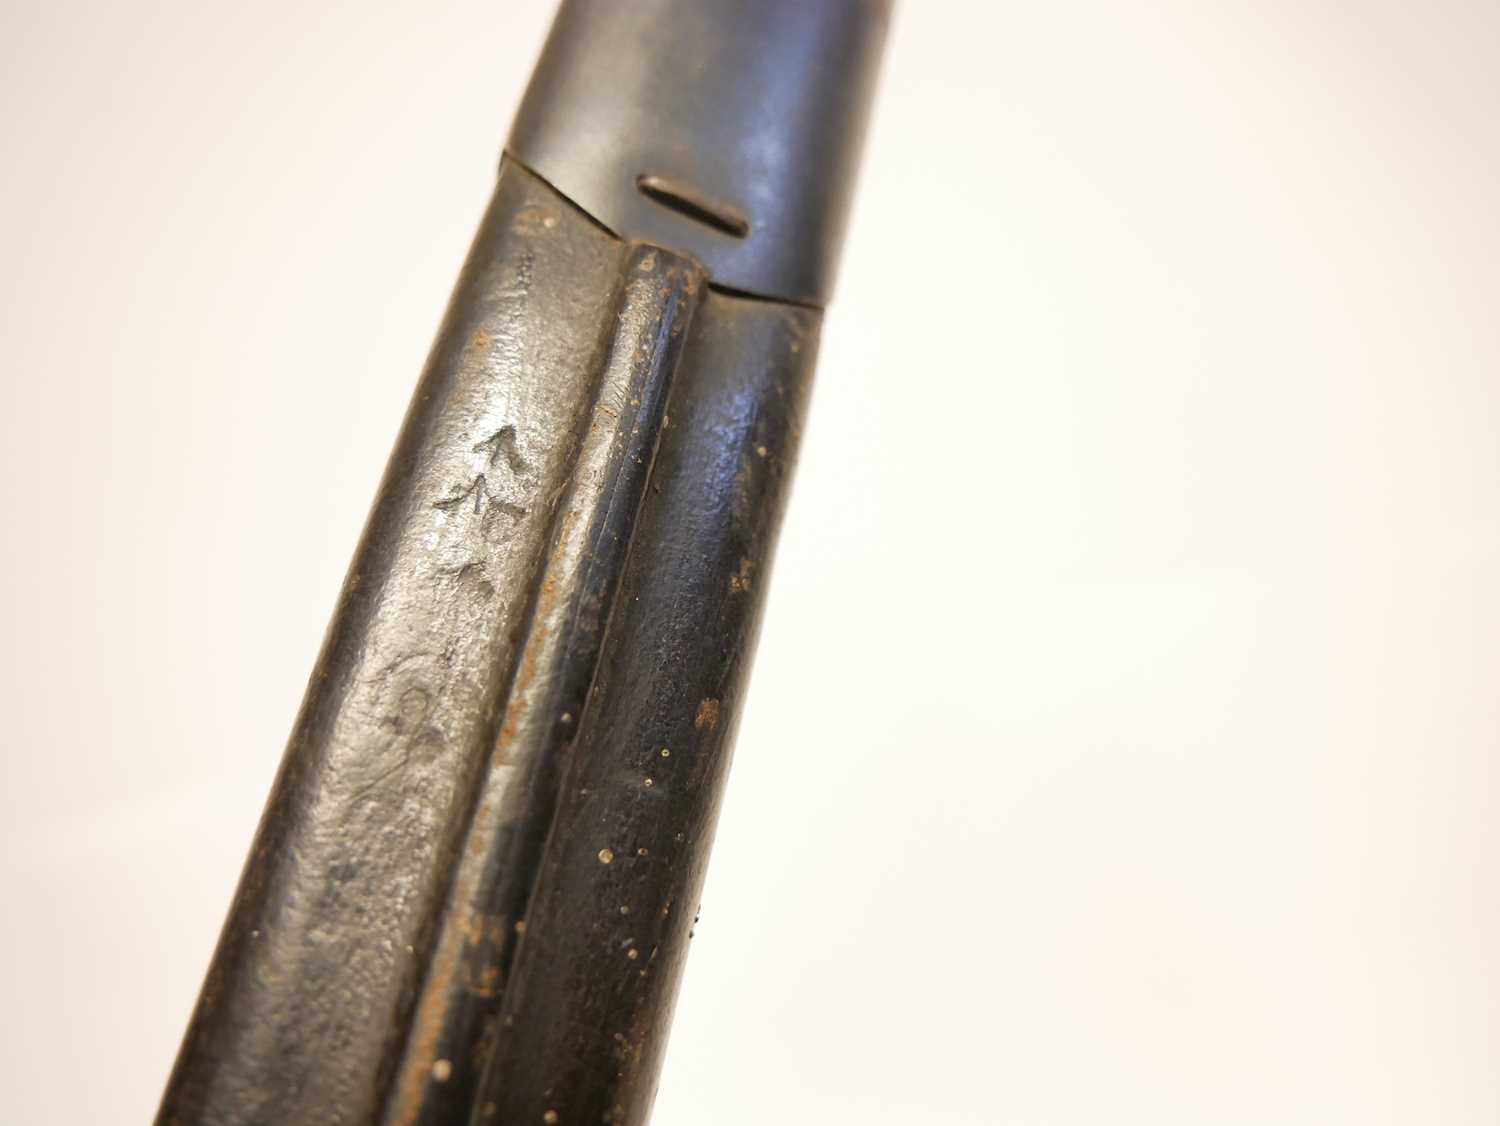 P14 Remington bayonet and scabbard, the ricasso with makers mark, 1913 and 2,16 date. Buyer must - Image 5 of 7